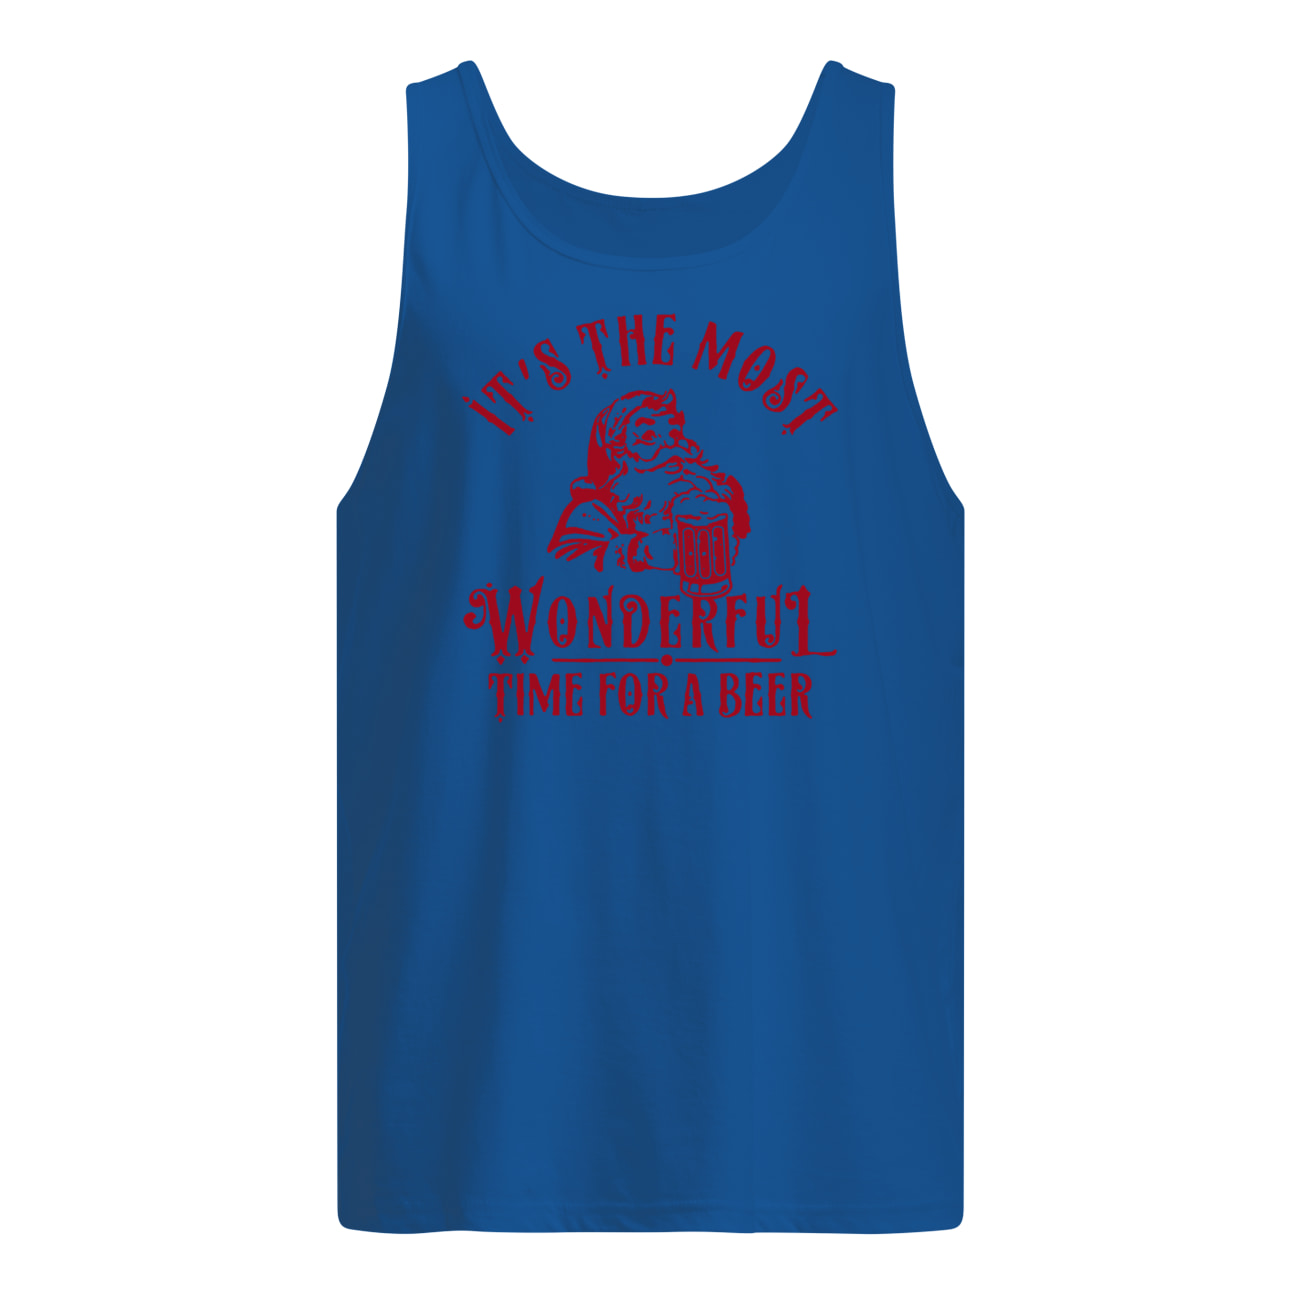 Santa claus it's the most wonderful time for a beer tank top